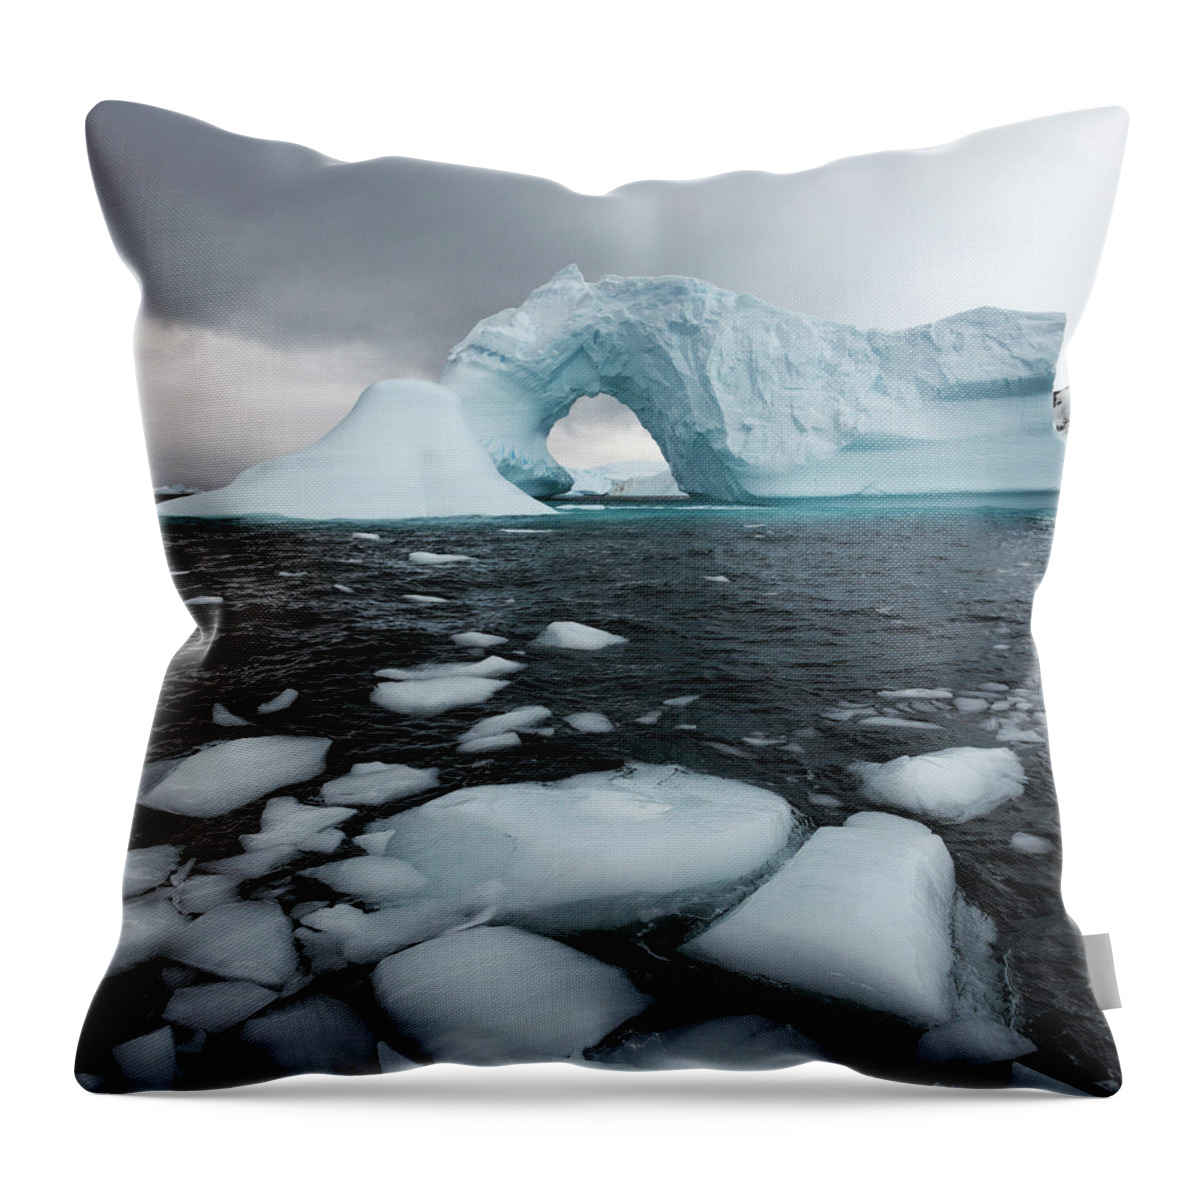 Cold Temperature Throw Pillow featuring the photograph Scenics Of Antarctica by Henryk Sadura